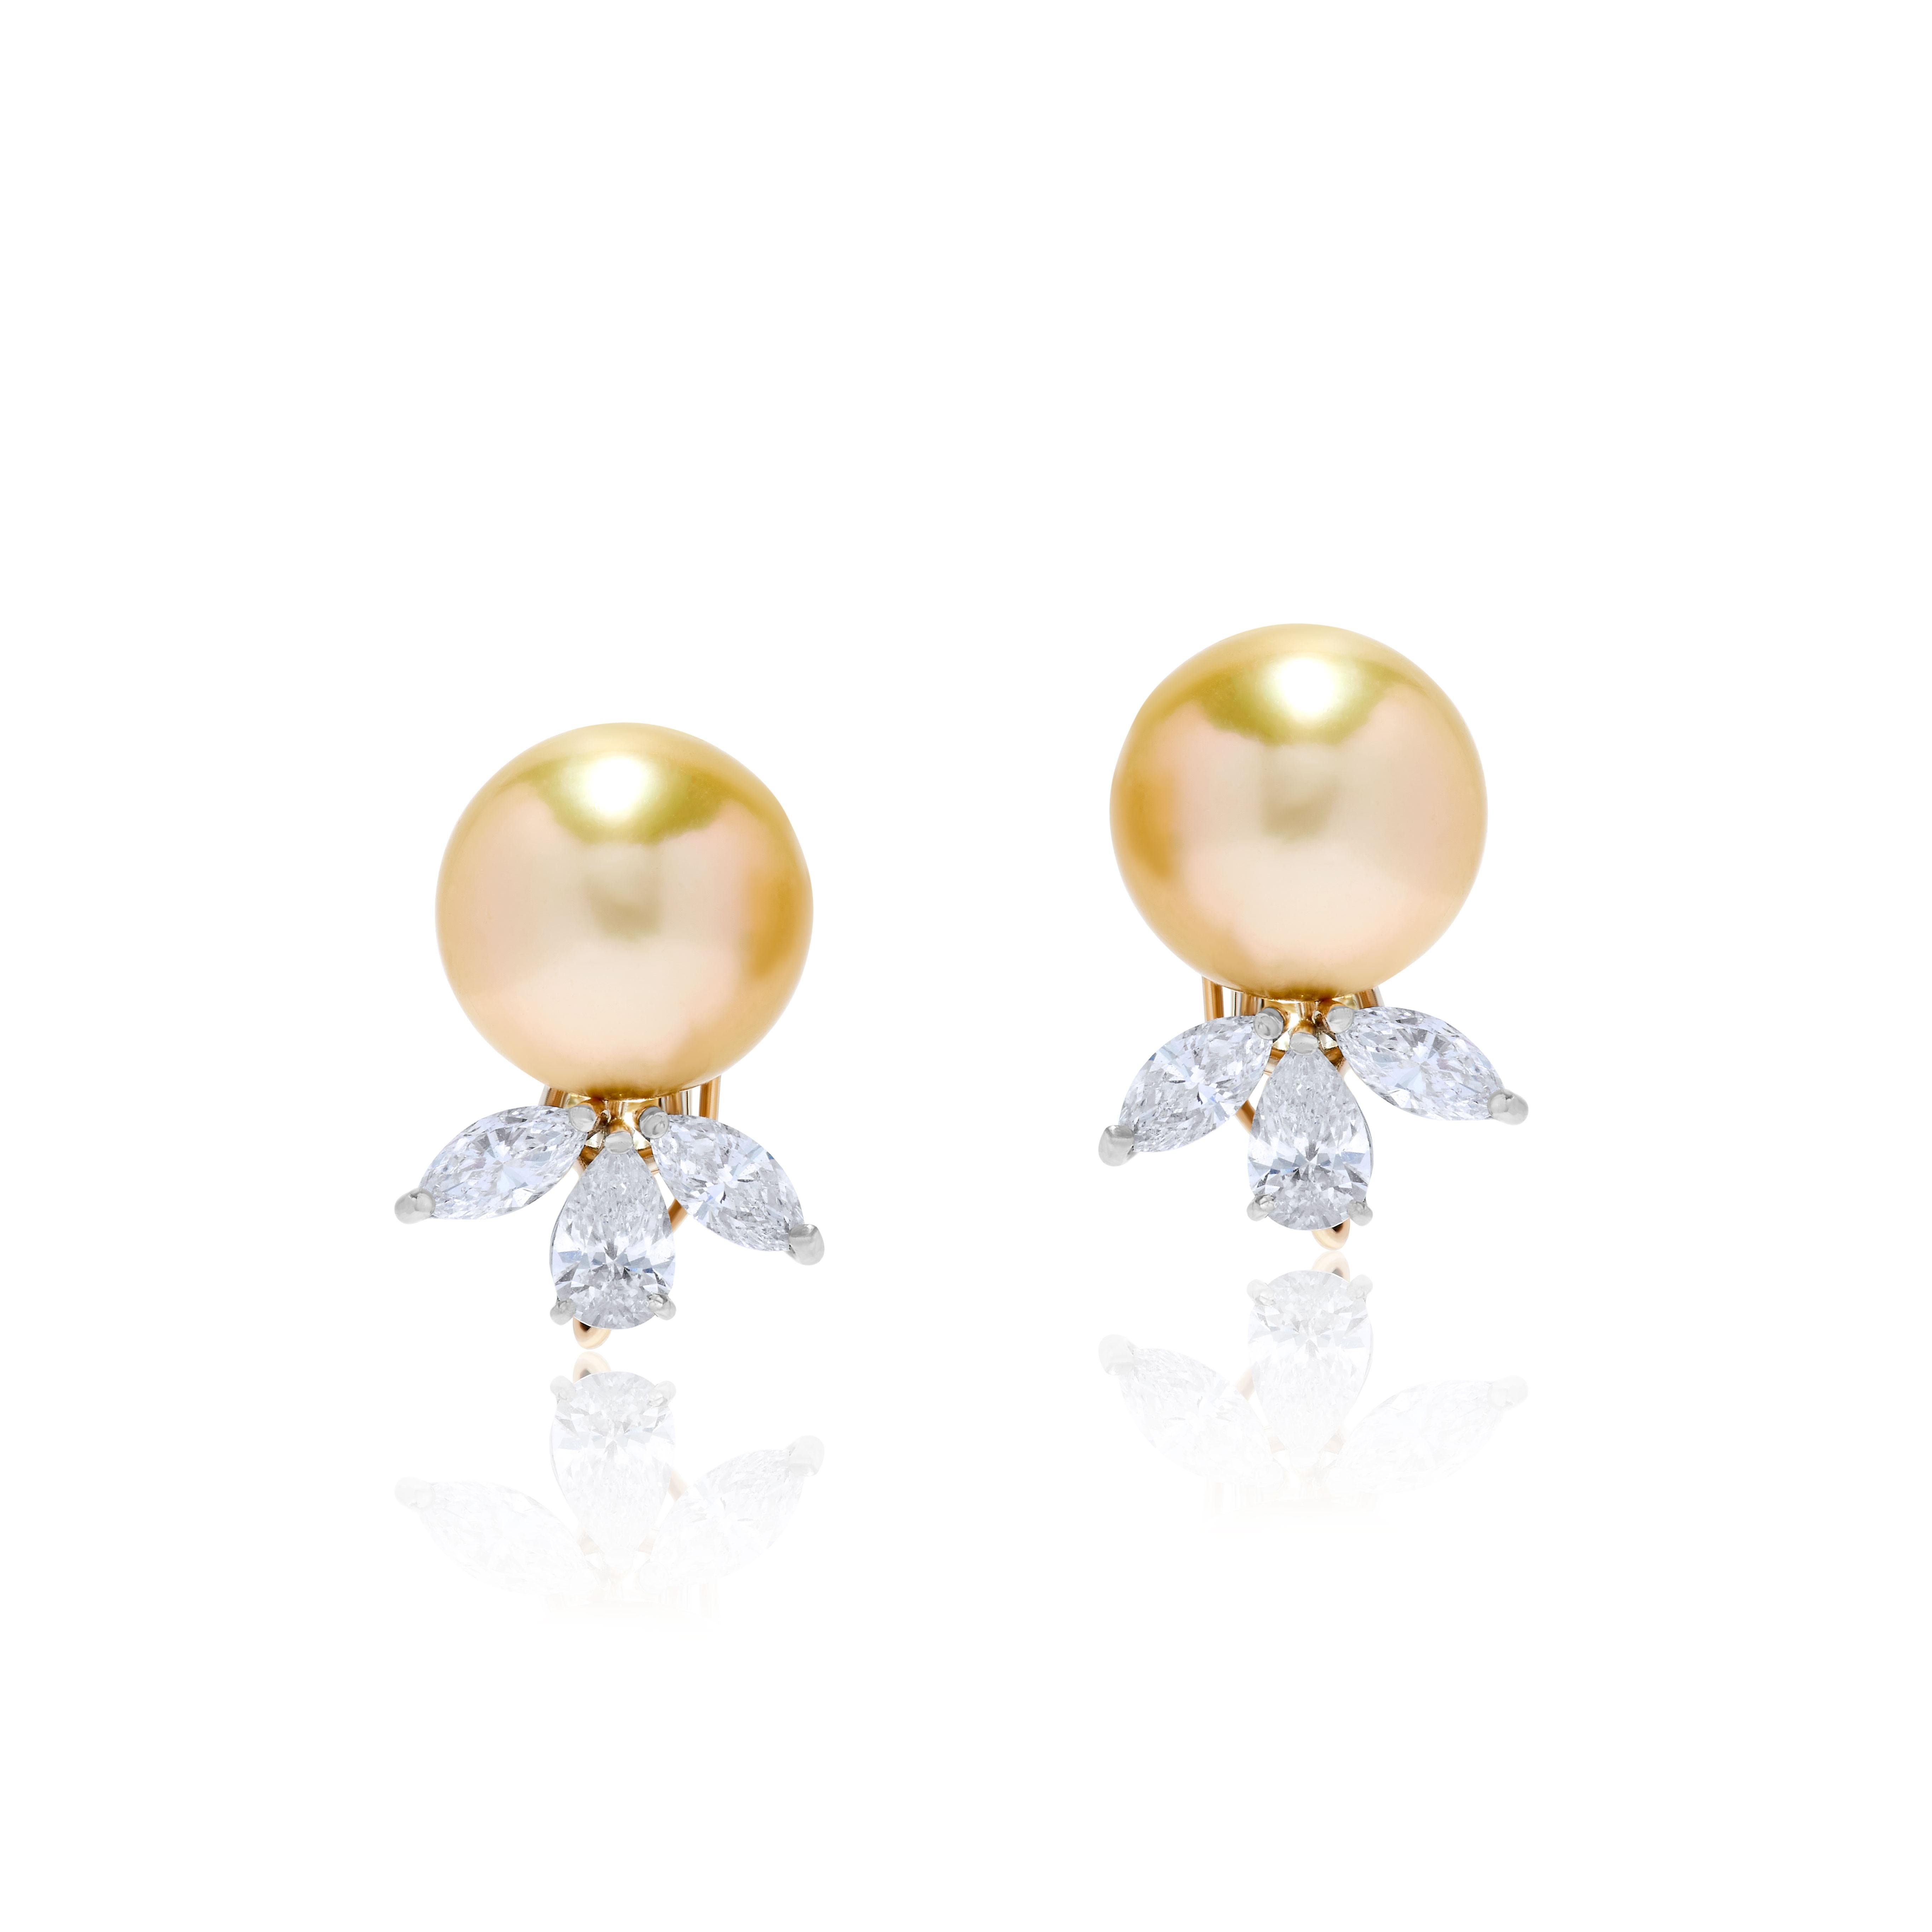 Andreoli Diamond South Sea Pearl 18 Karat White Gold Earrings

These earrings feature:
- 1.93 Carat Diamond
- 10.00 Gram South Sea Pearl (12.4 x 12.2)
- 2.93 Gram 18K White Gold
- Made In Italy